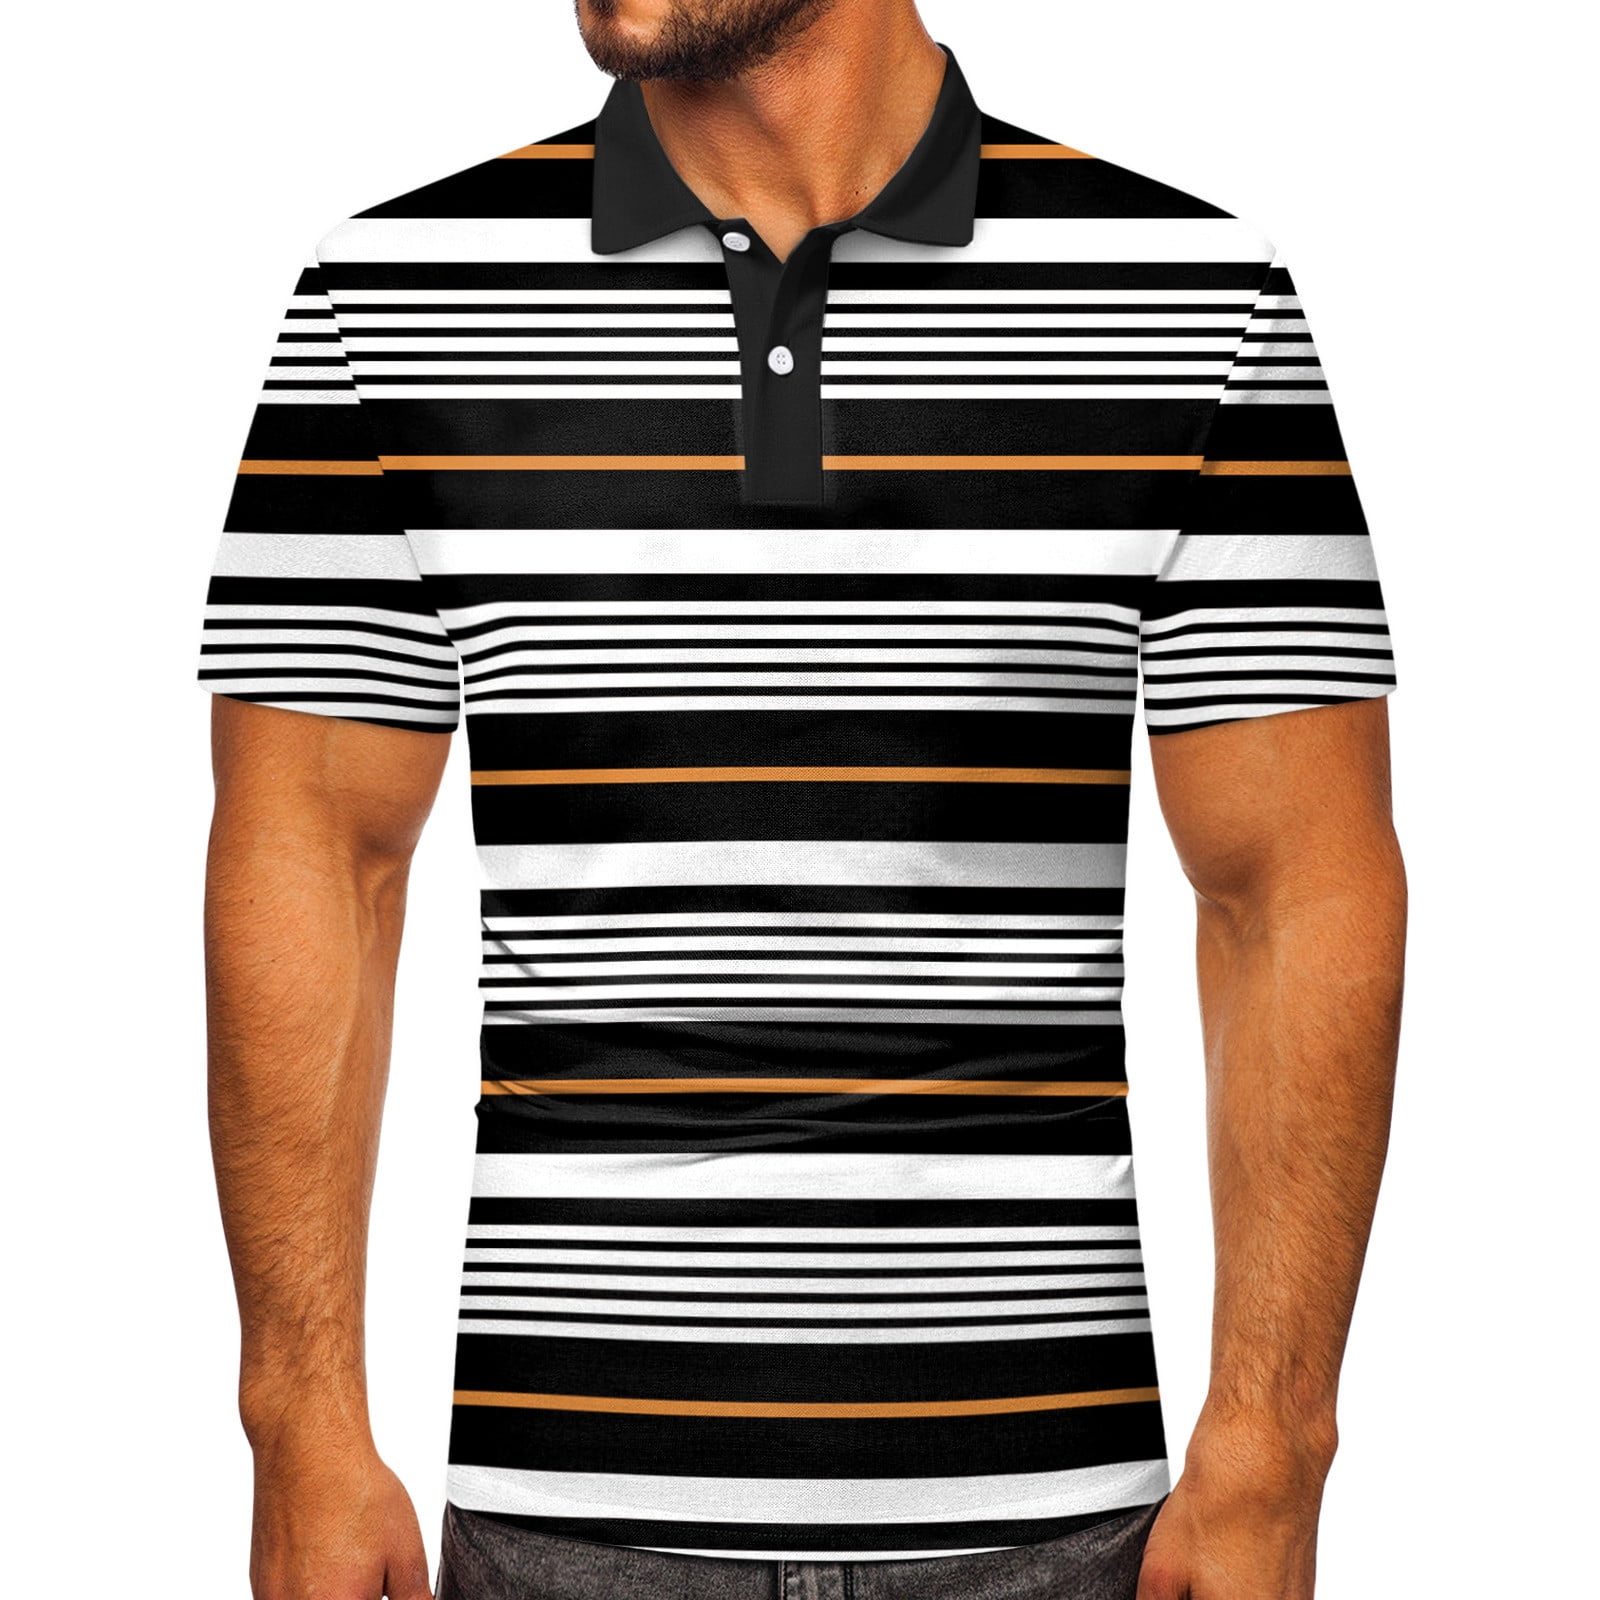 Pedort Golf Shirts For Men Casual Short Sleeve Golf Polo Daily Collared ...